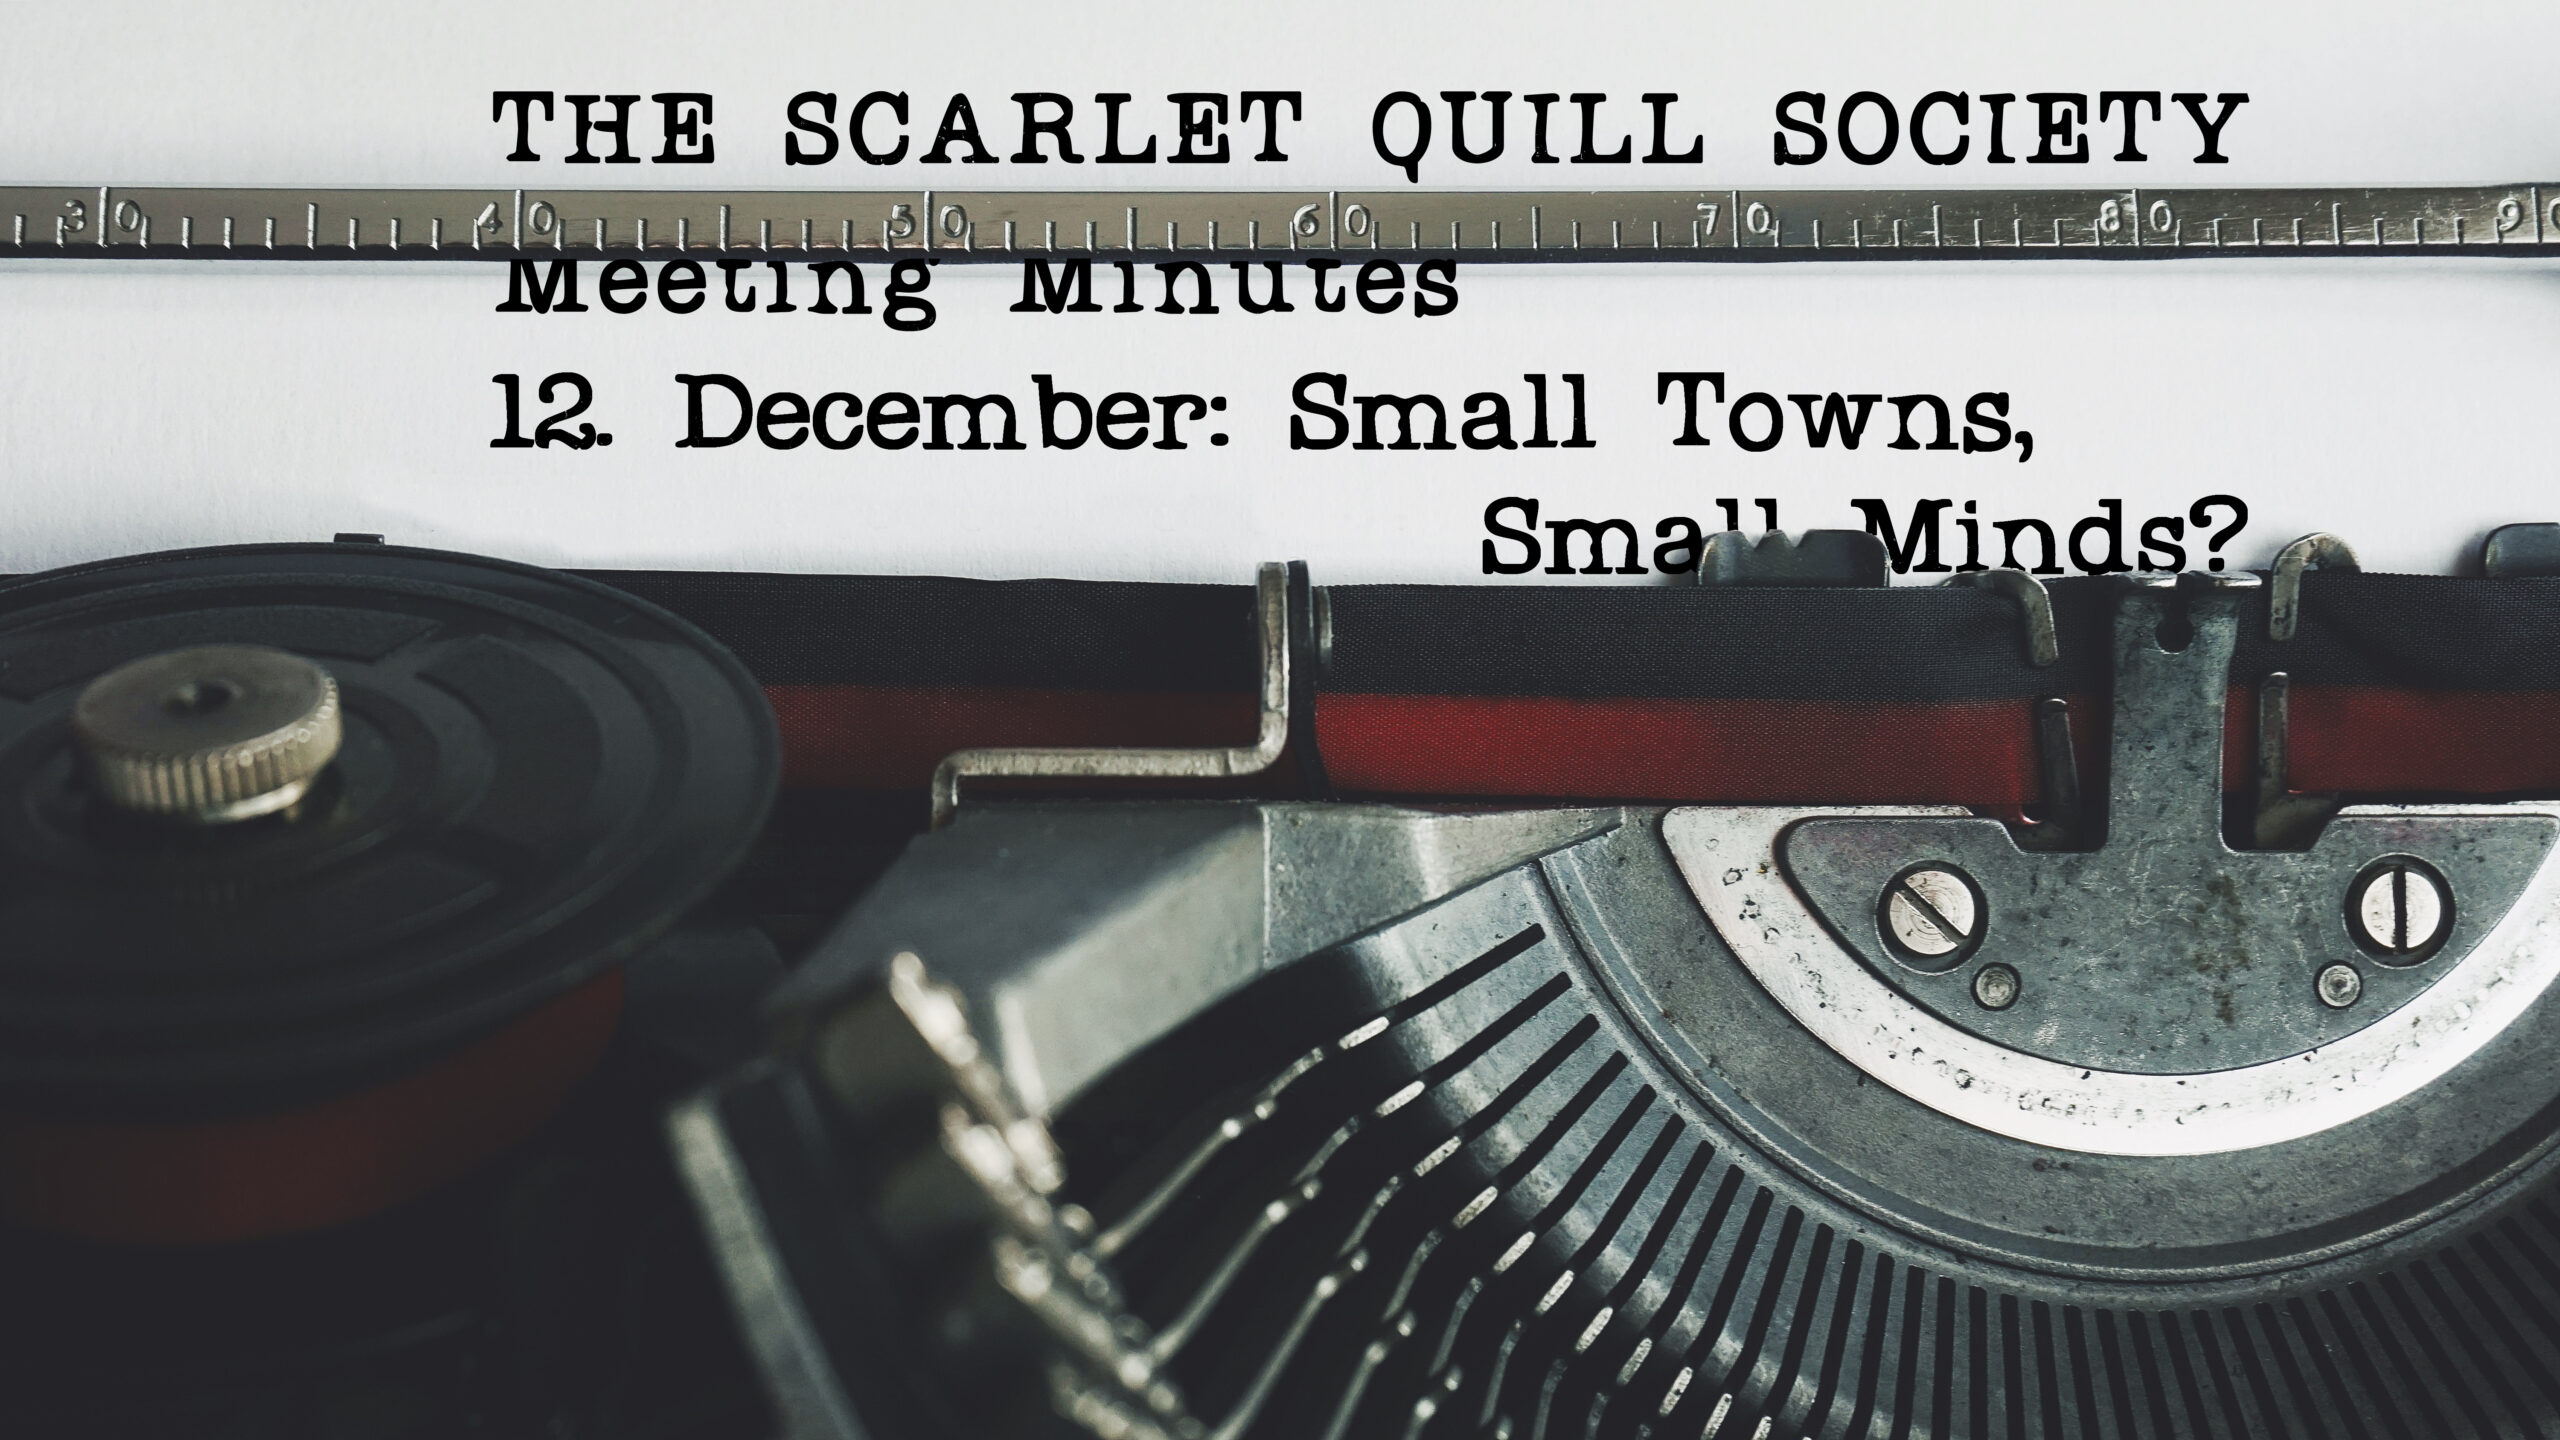 The Scarlet Quill Society: Small Towns and Smaller Minds